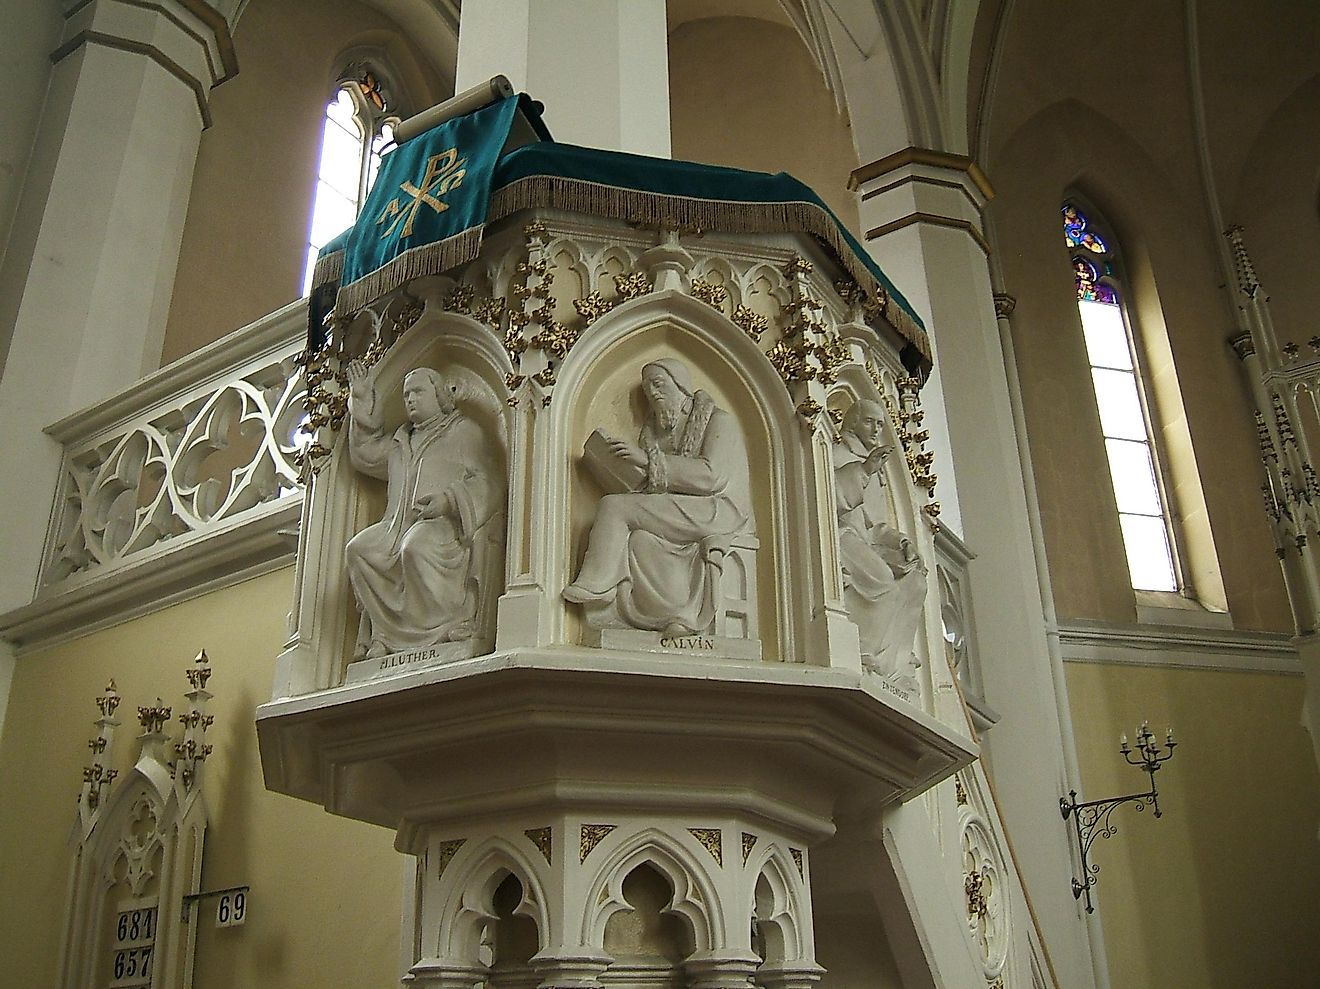 Martin Luther and John Calvin, key proponents of the Protestant Reformation are depicted on a church pulpit.